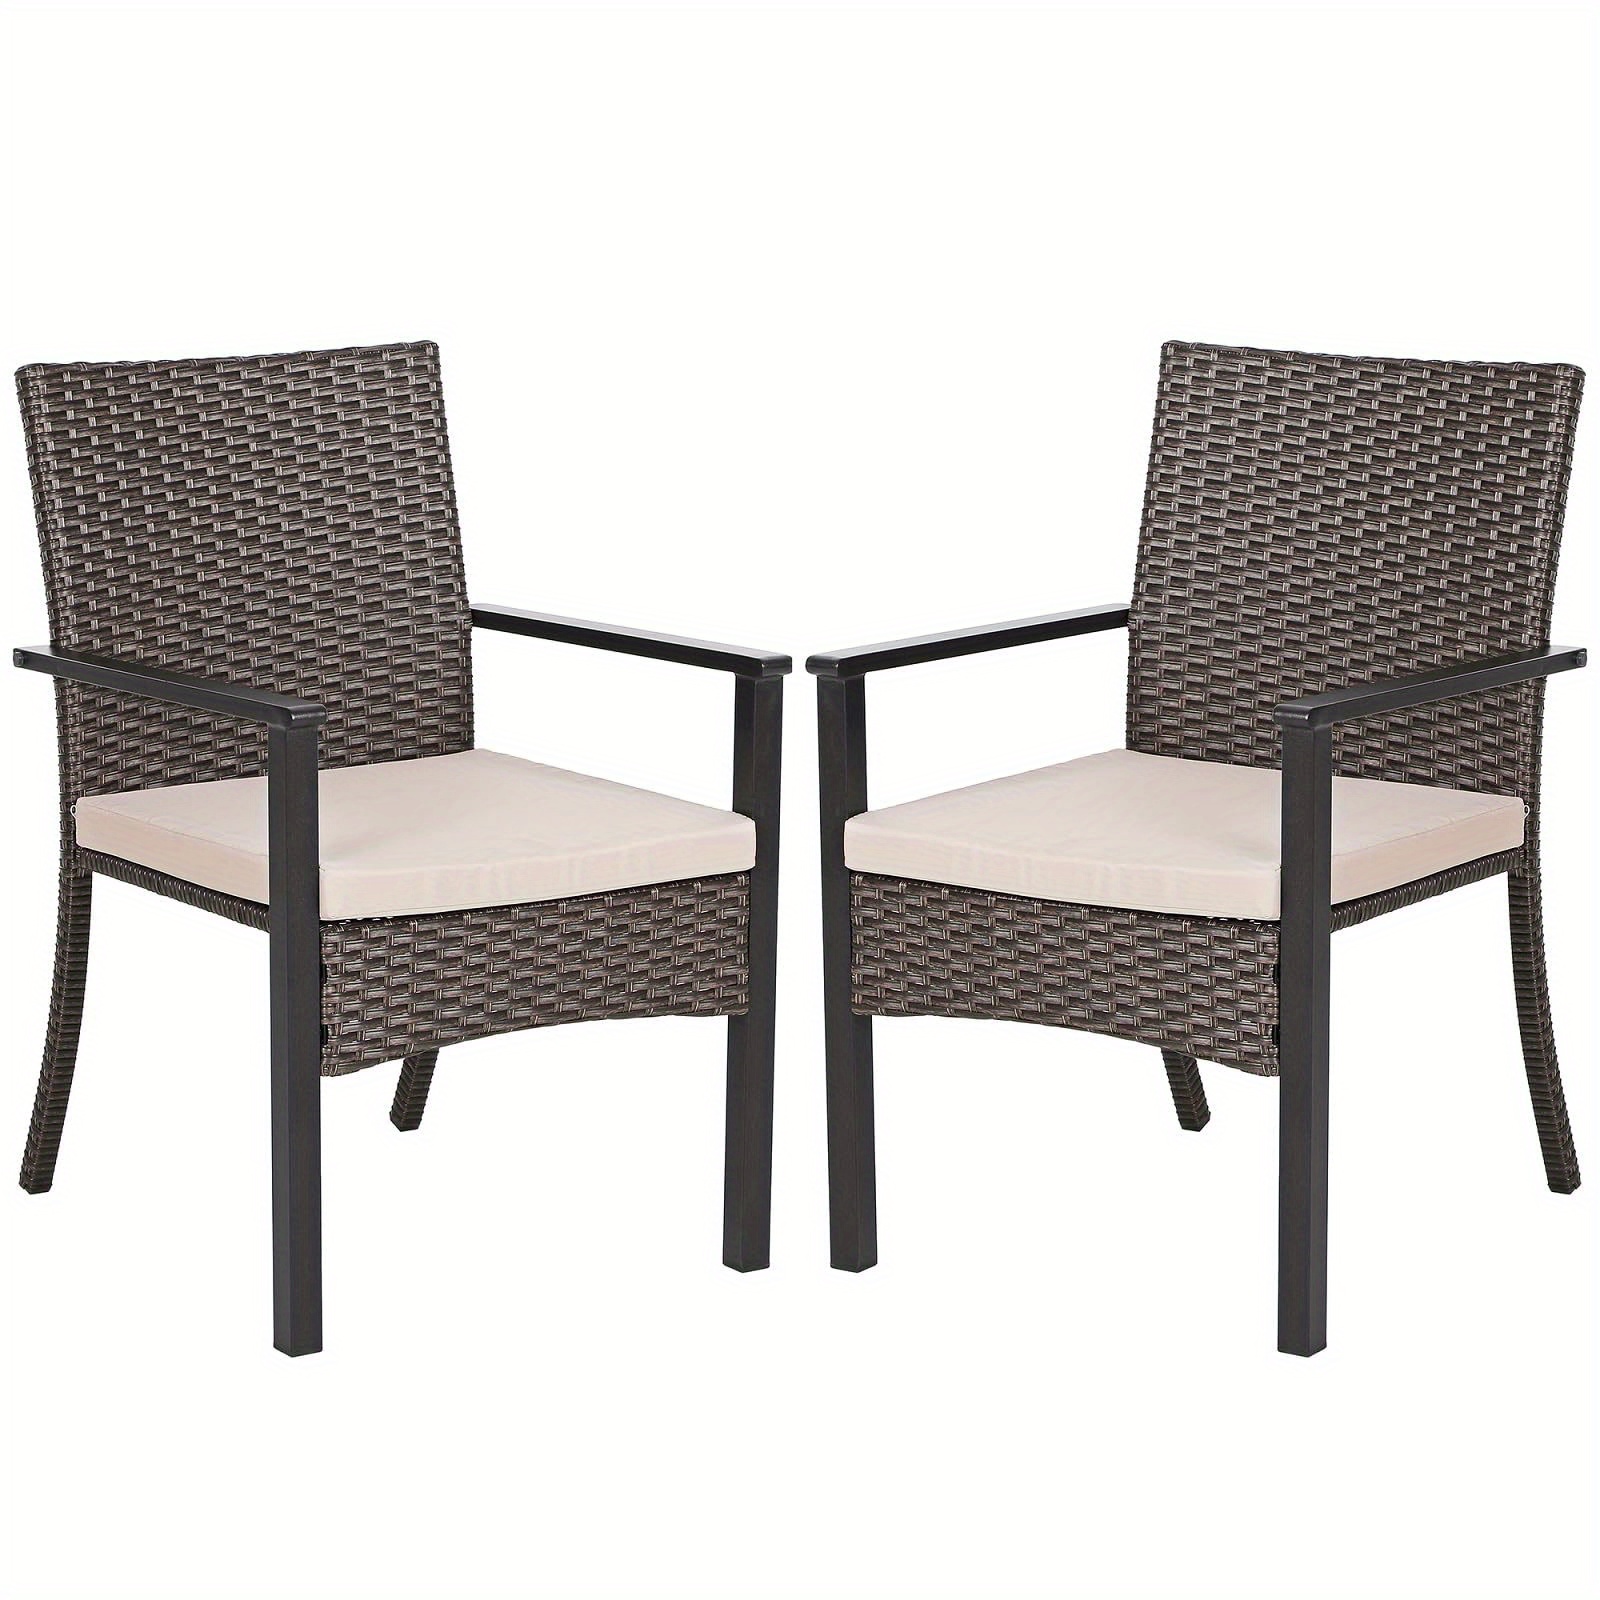 

Patio Chair Set Of 2 With Cushions, Rattan Wicker Outdoor Dining Chairs Armchairs Mid Back Clearance For Porch Backyard, Max Bearing Capacity: 330 Lbs